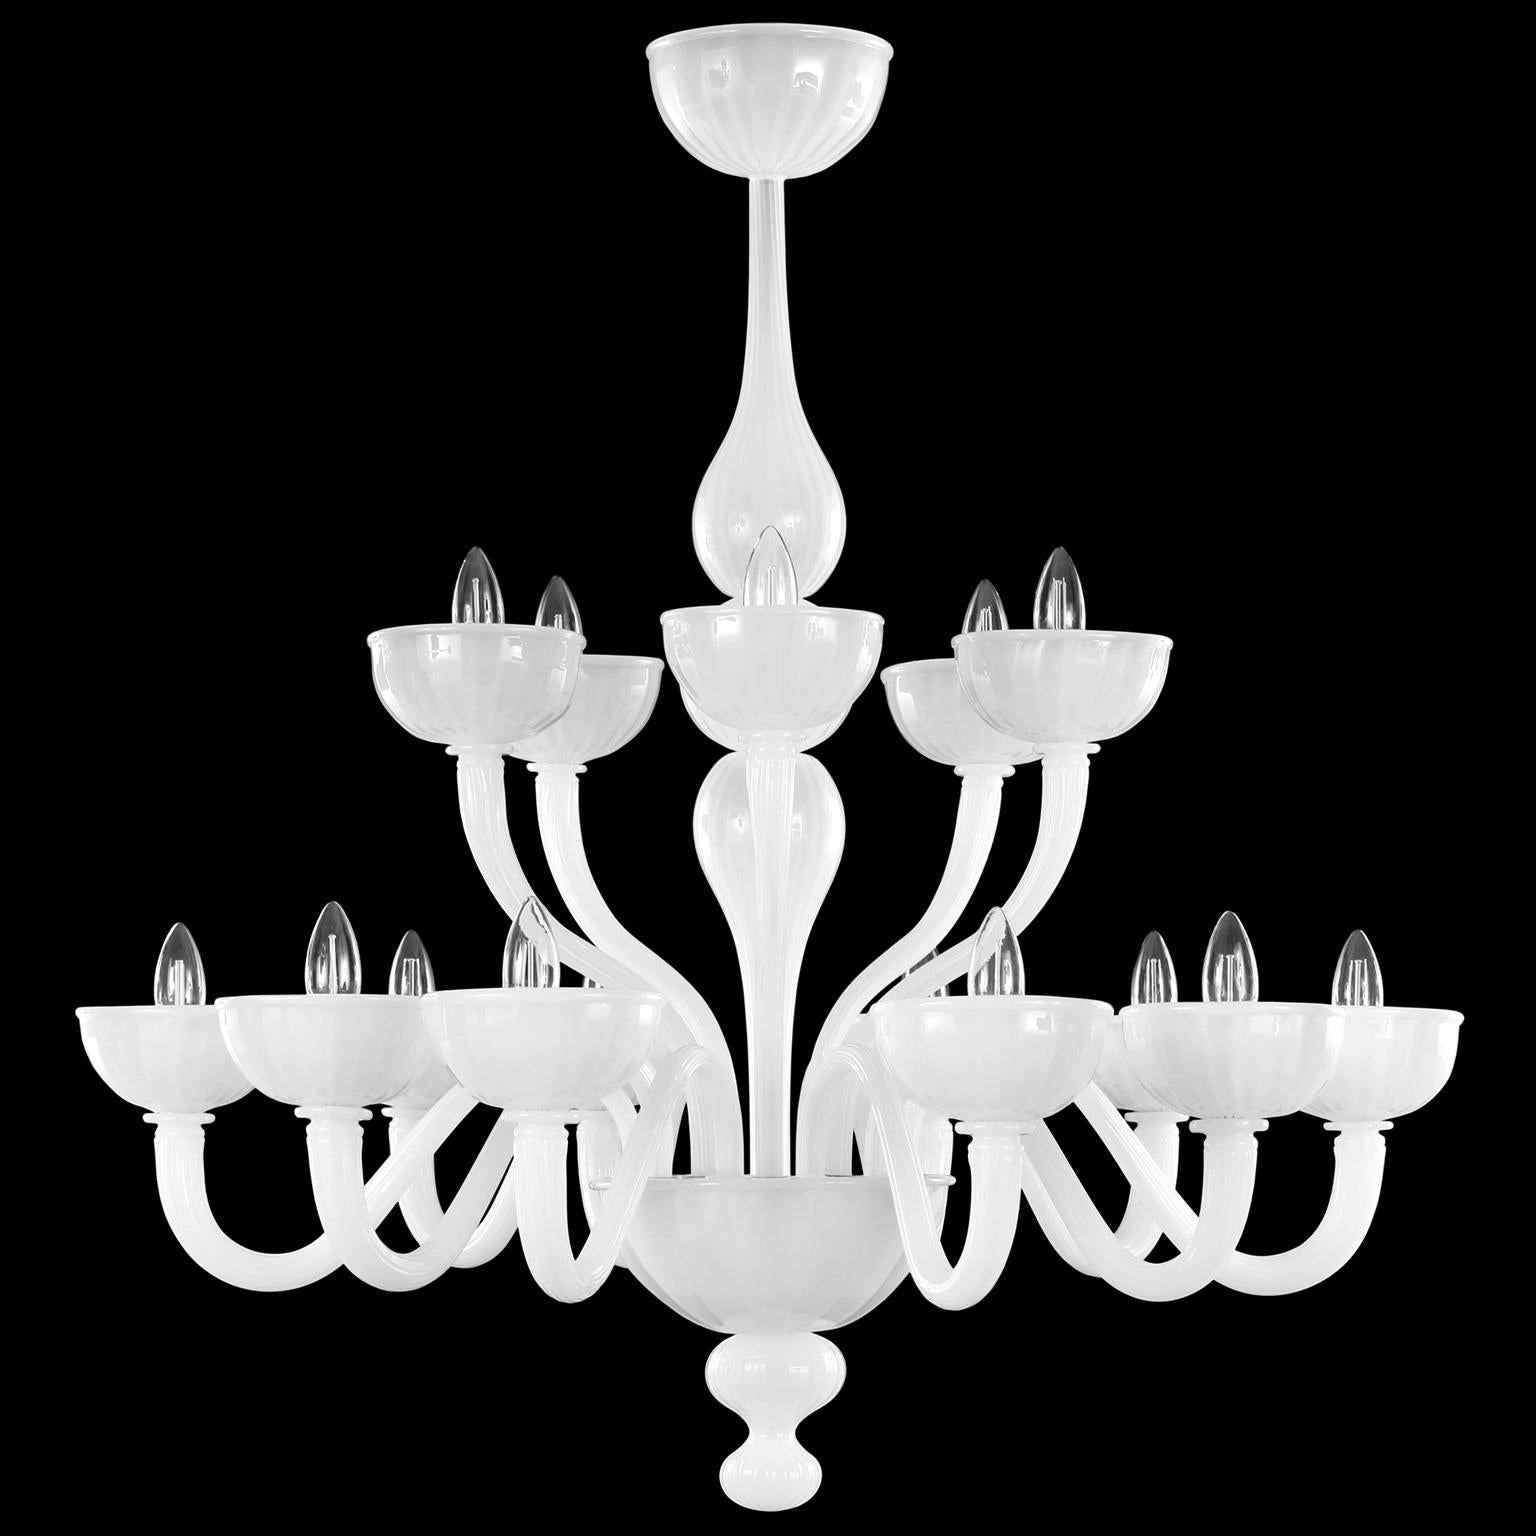 Edgar chandelier, 10+5 lights, white silk rigadin Murano glass by Multiforme
Edgar Murano glass chandelier is one of those chandeliers in our collections that stands out thanks to its harmonious and balanced shapes. We have designed a chandelier